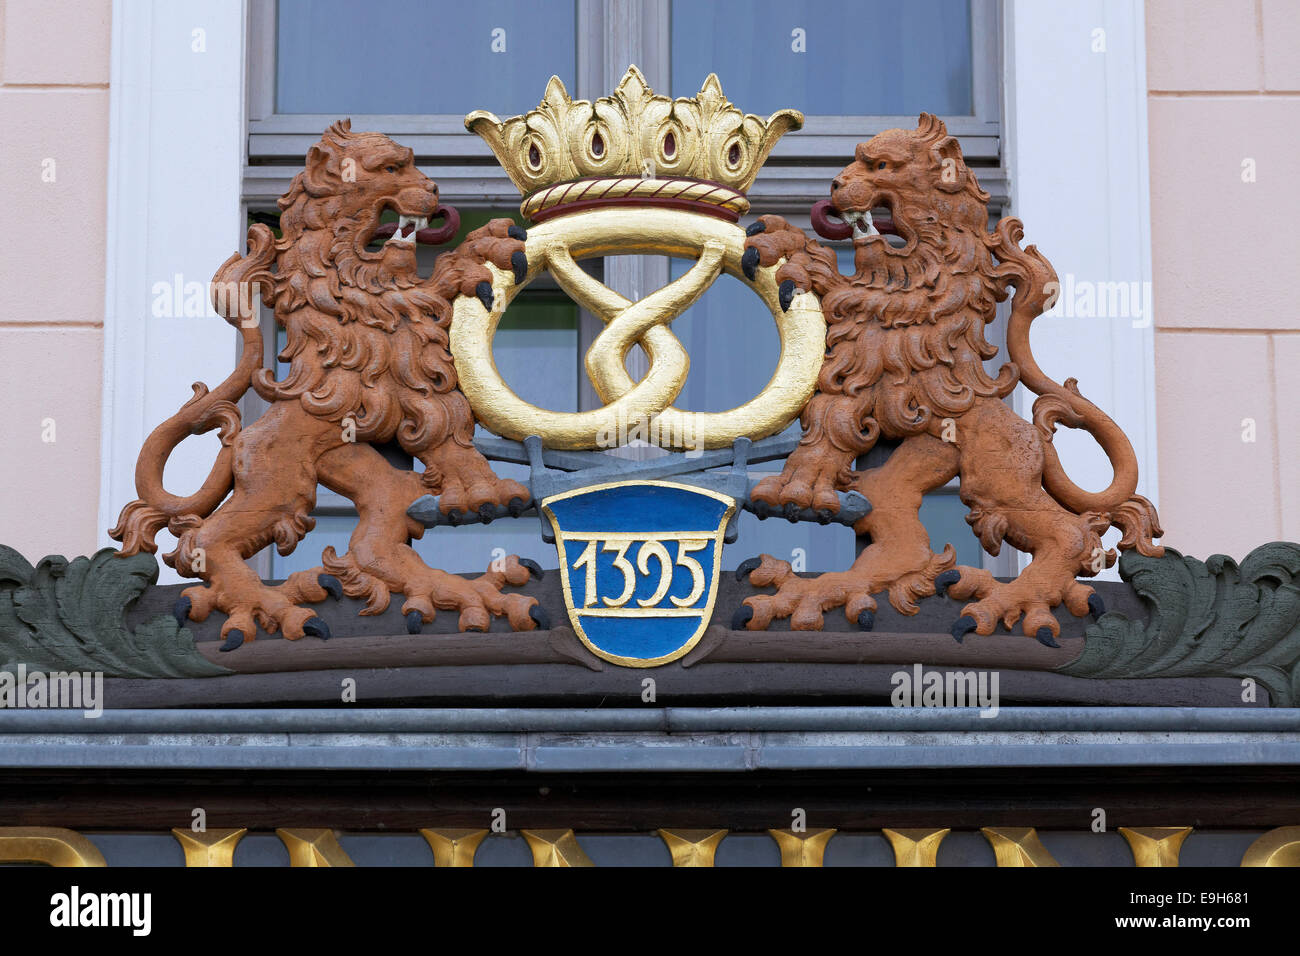 Two lions holding a pretzel, coat of arms on the Haus der Baeckerinnung or the House of Bakers, Görlitz, Saxony, Germany Stock Photo